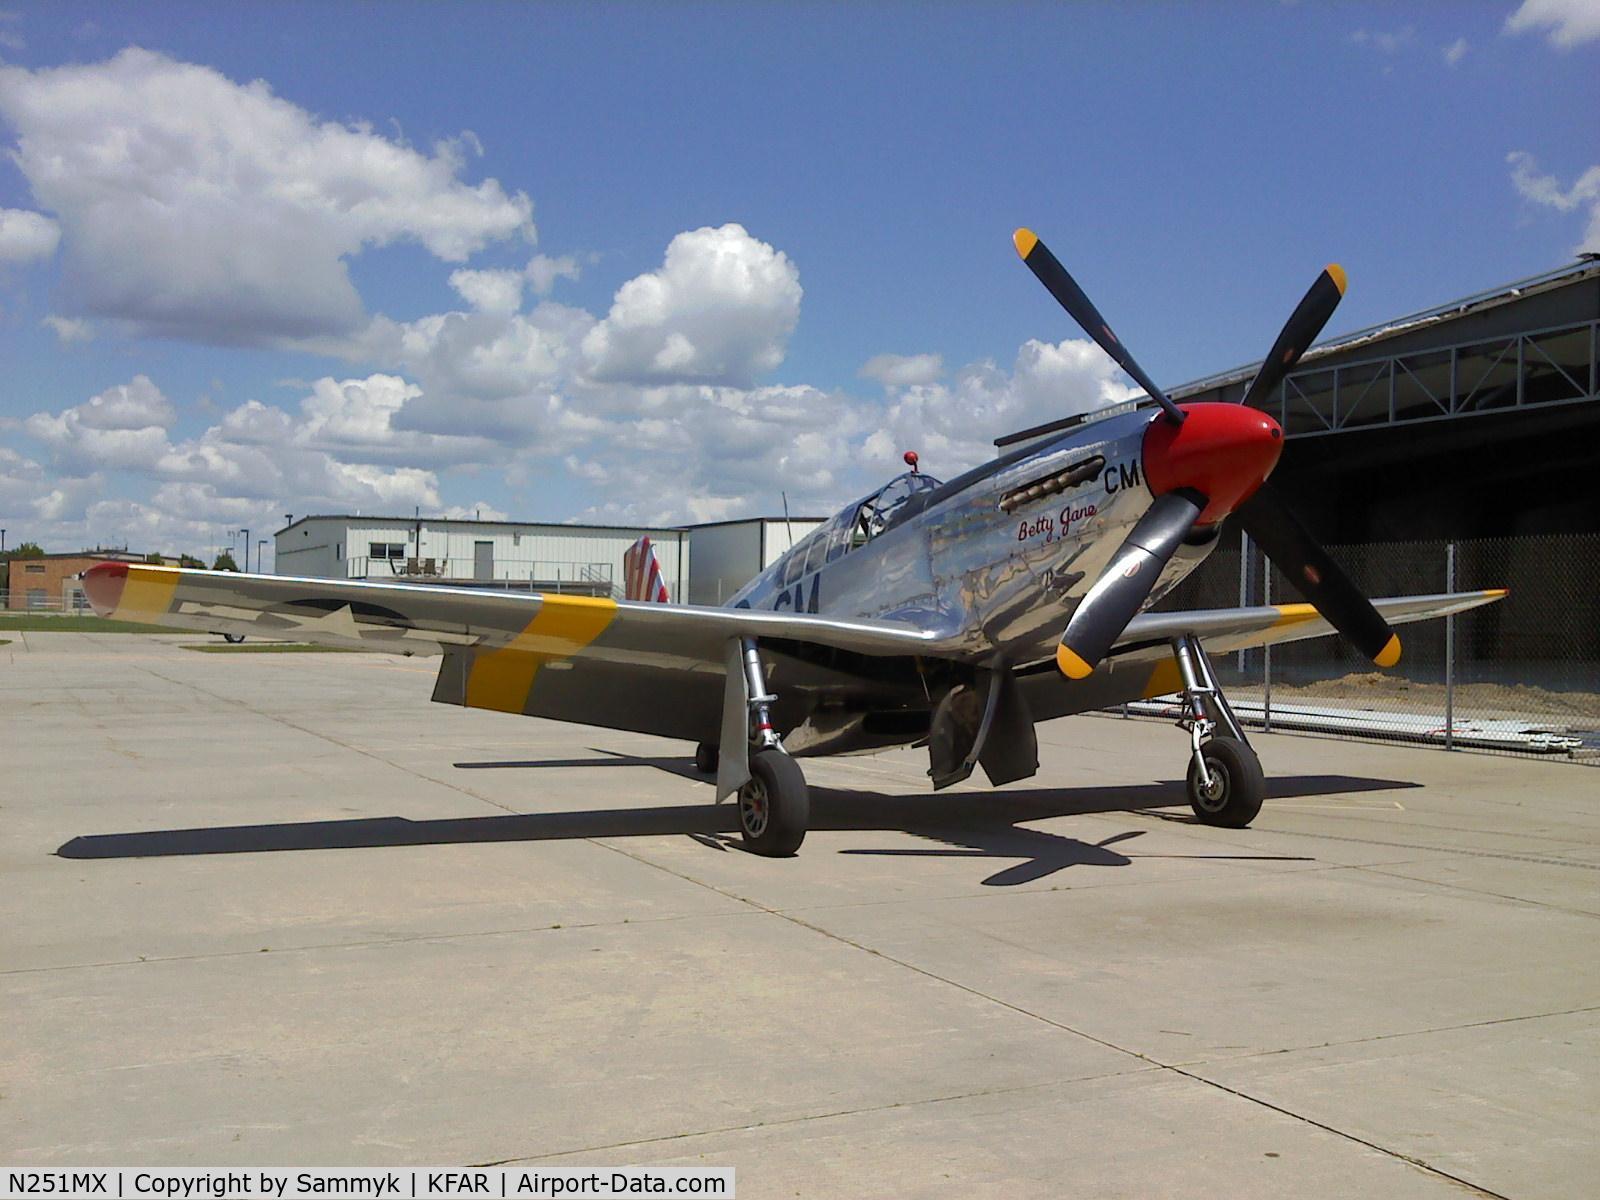 N251MX, 1943 North American P-51C-10 Mustang C/N 103-22730, The only flying TP-51C flying. This one came to the Fargo Air Museum with the Collings Foundation last Summer.